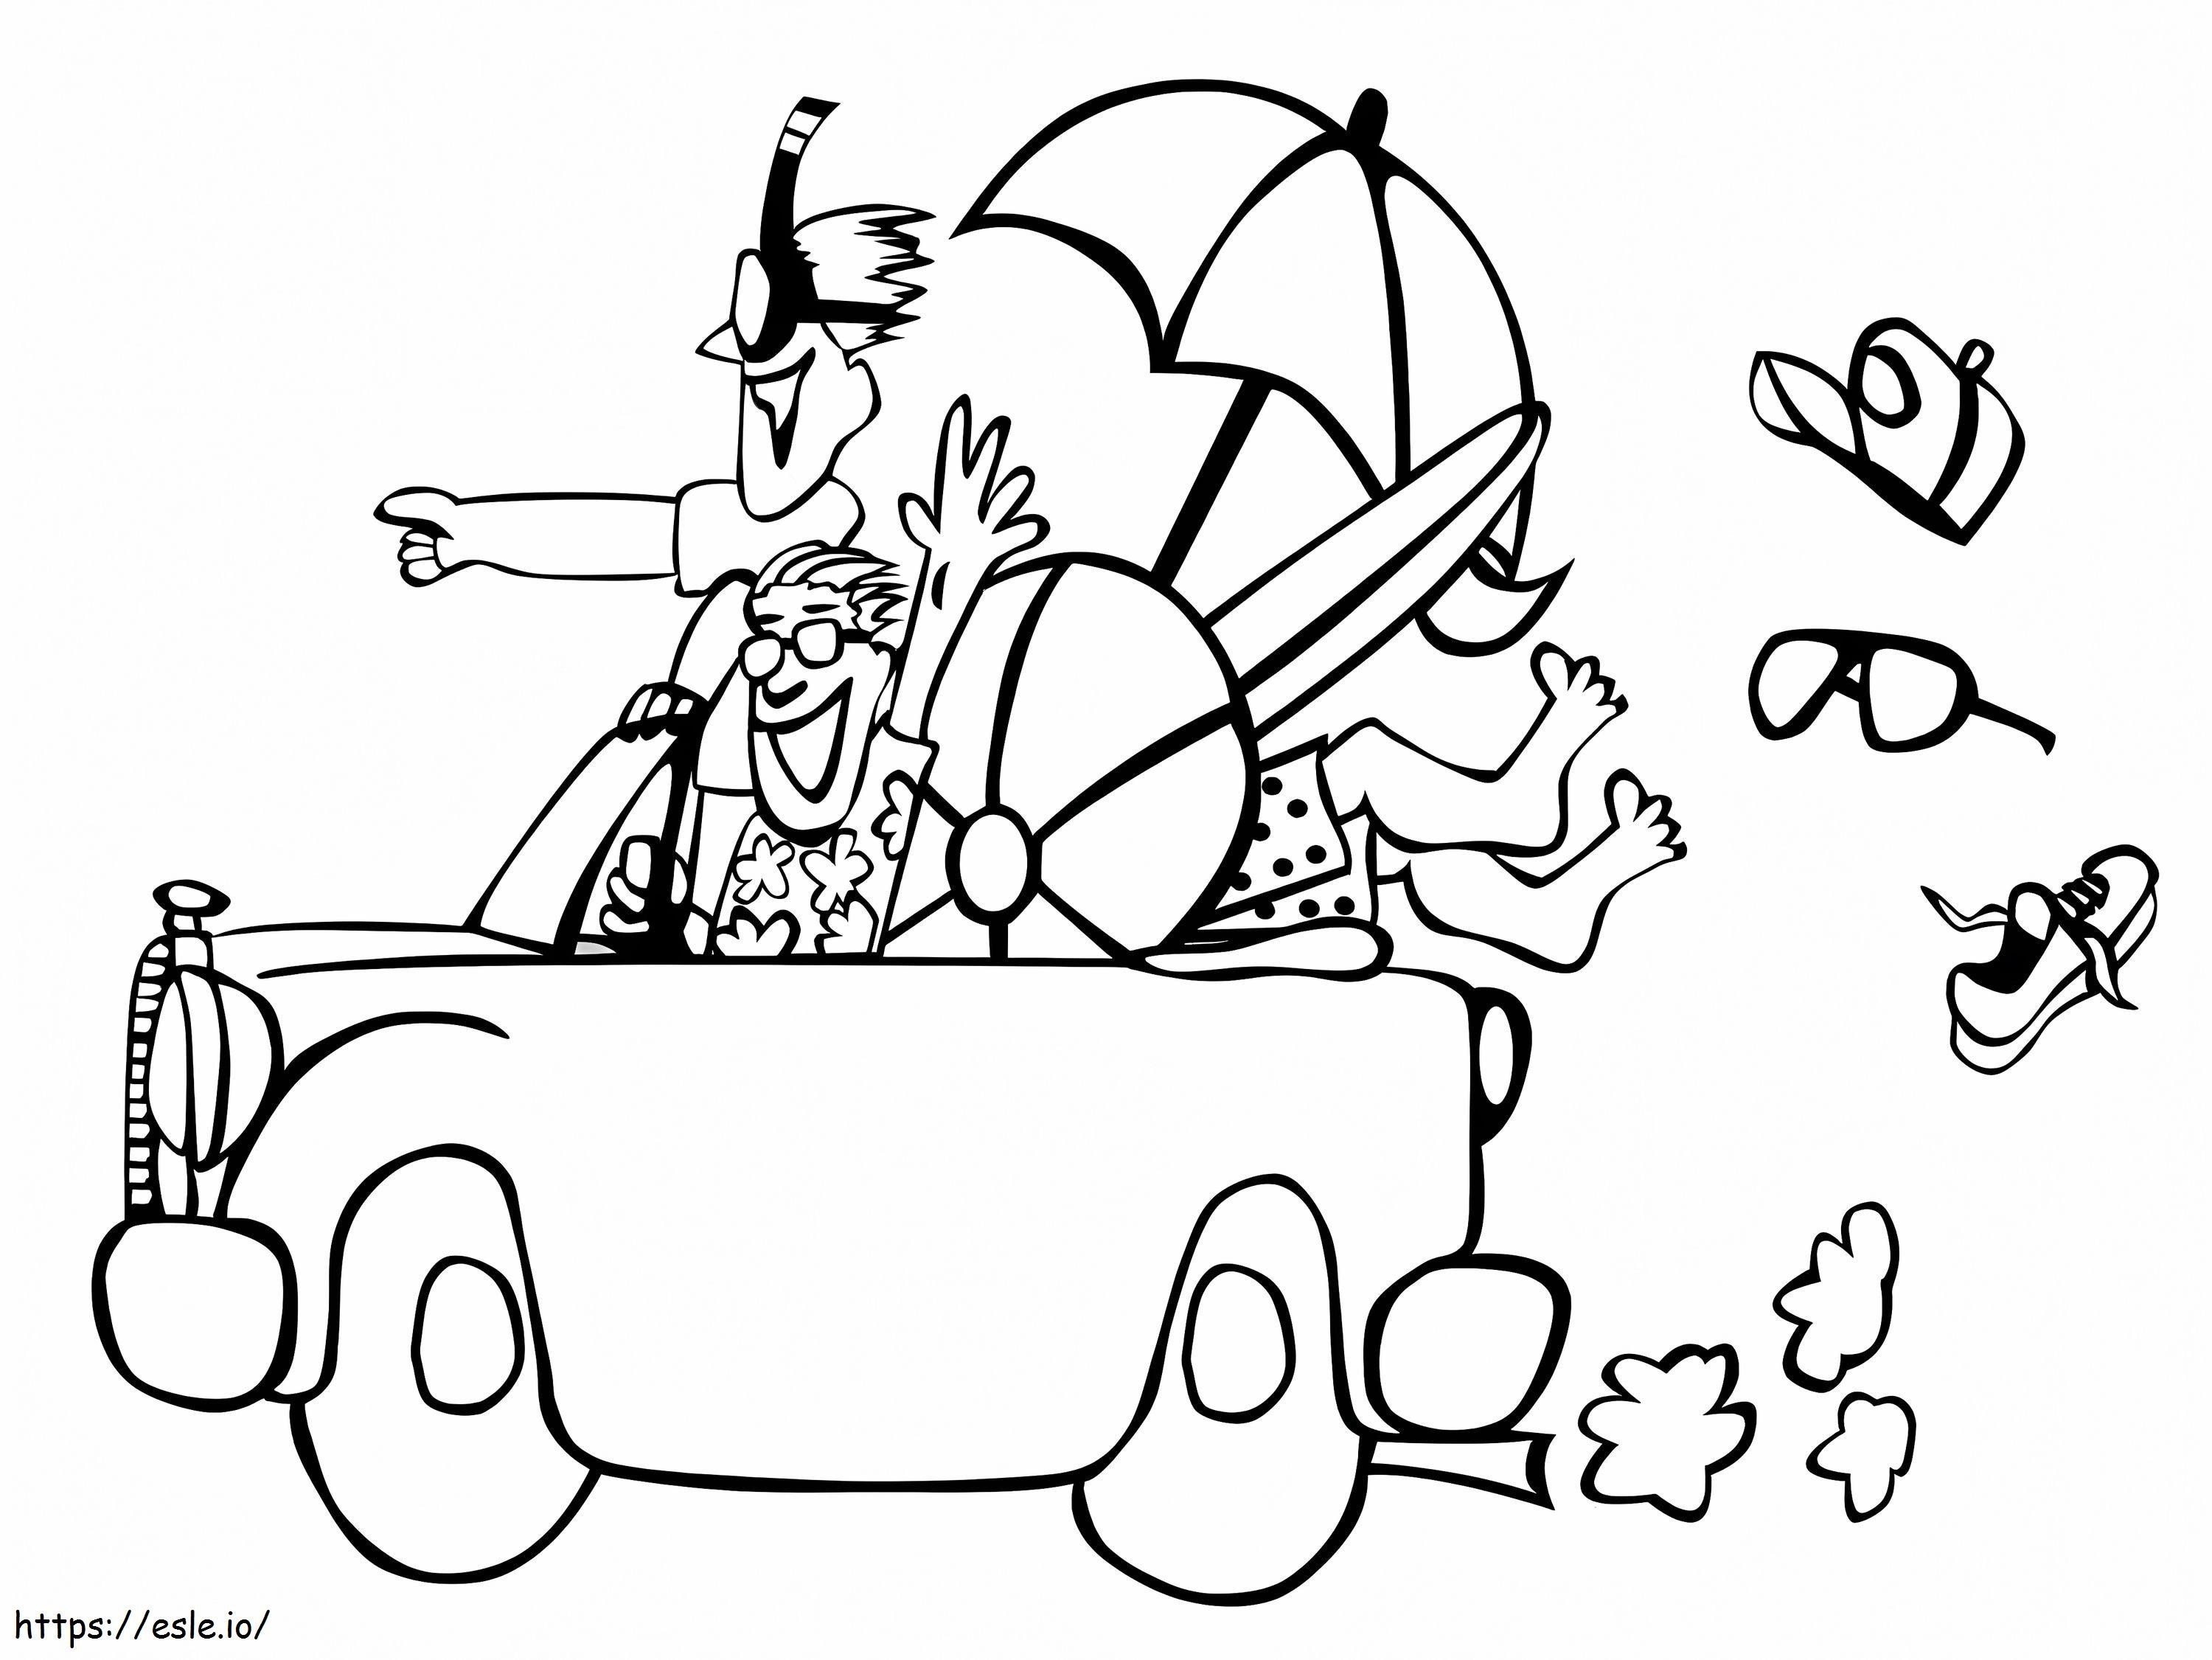 Go To The Beach coloring page